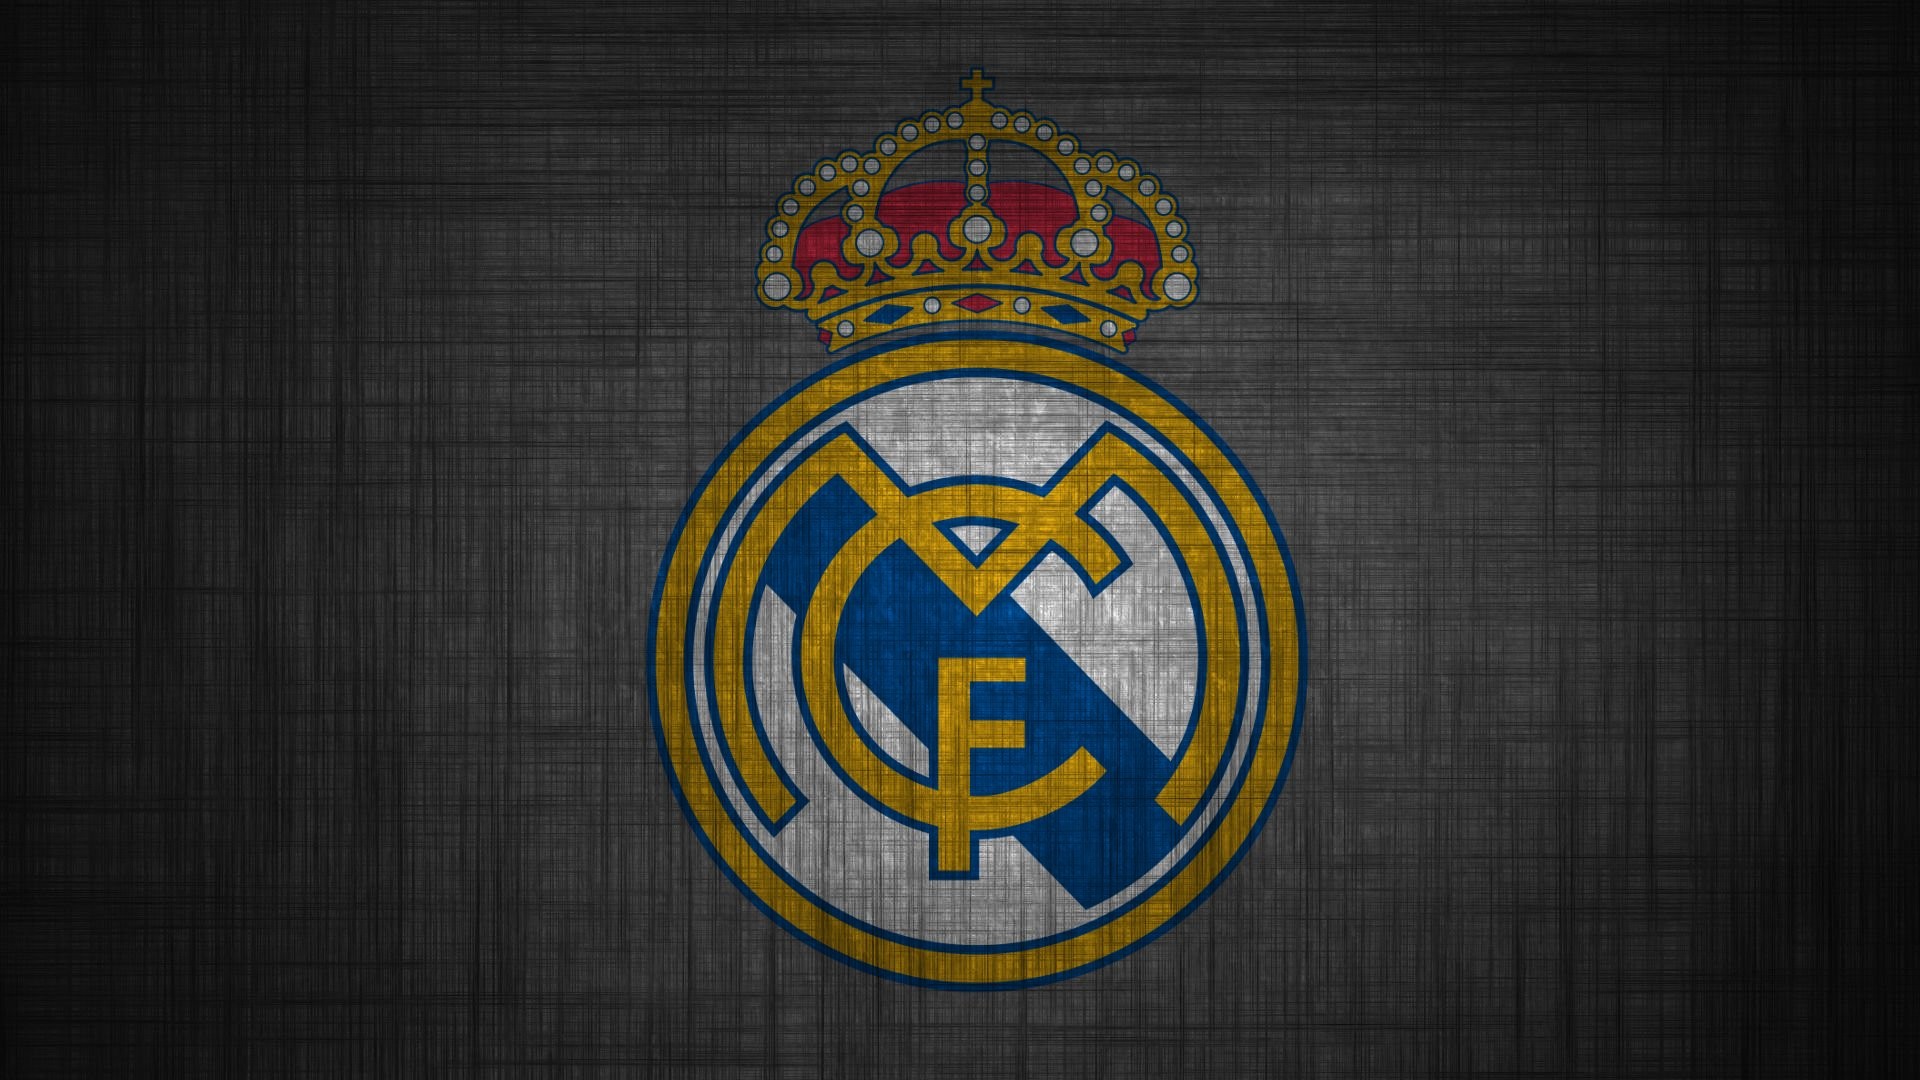 HD Real Madrid CF Backgrounds with resolution 1920x1080 pixel. You can make this wallpaper for your Mac or Windows Desktop Background, iPhone, Android or Tablet and another Smartphone device